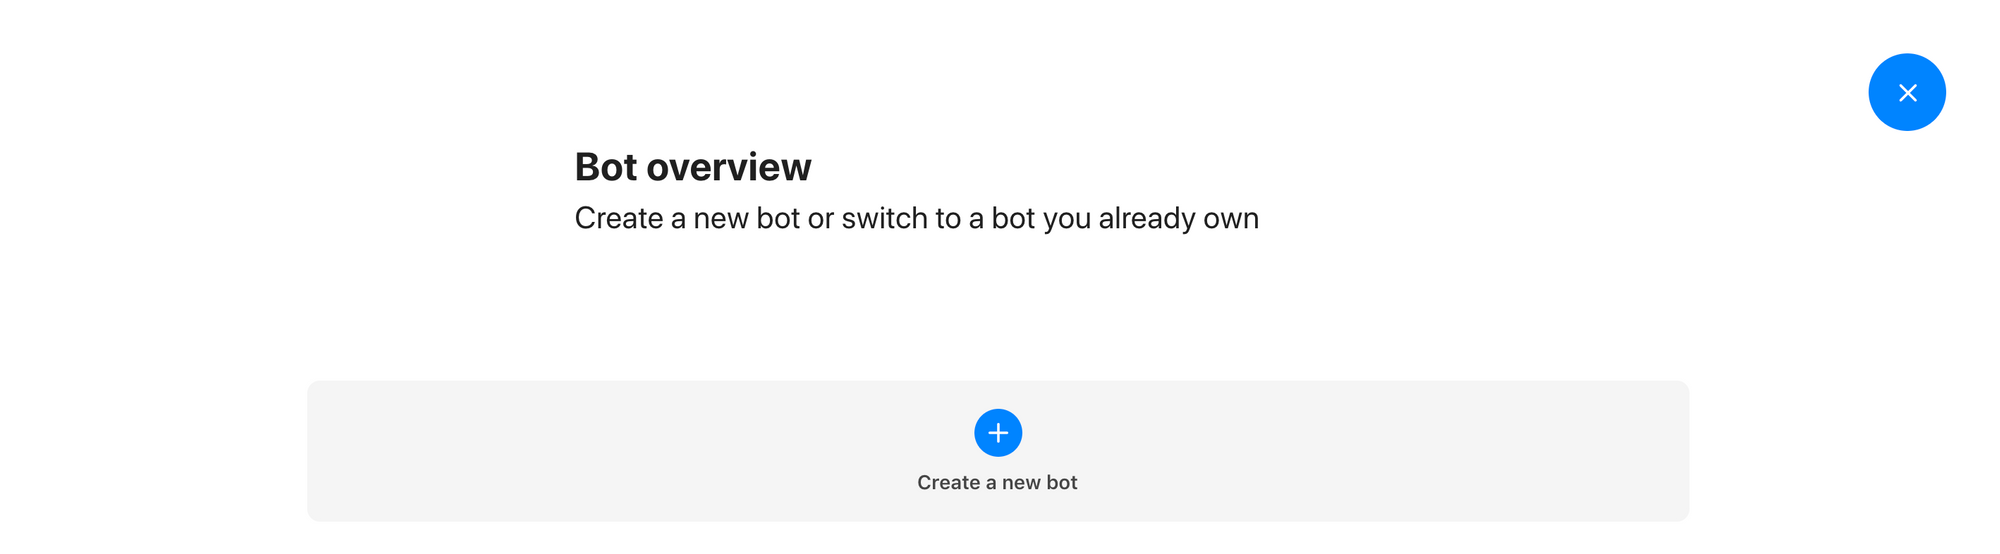 Bot-overview-page-where-you-can-create-a-new-bot